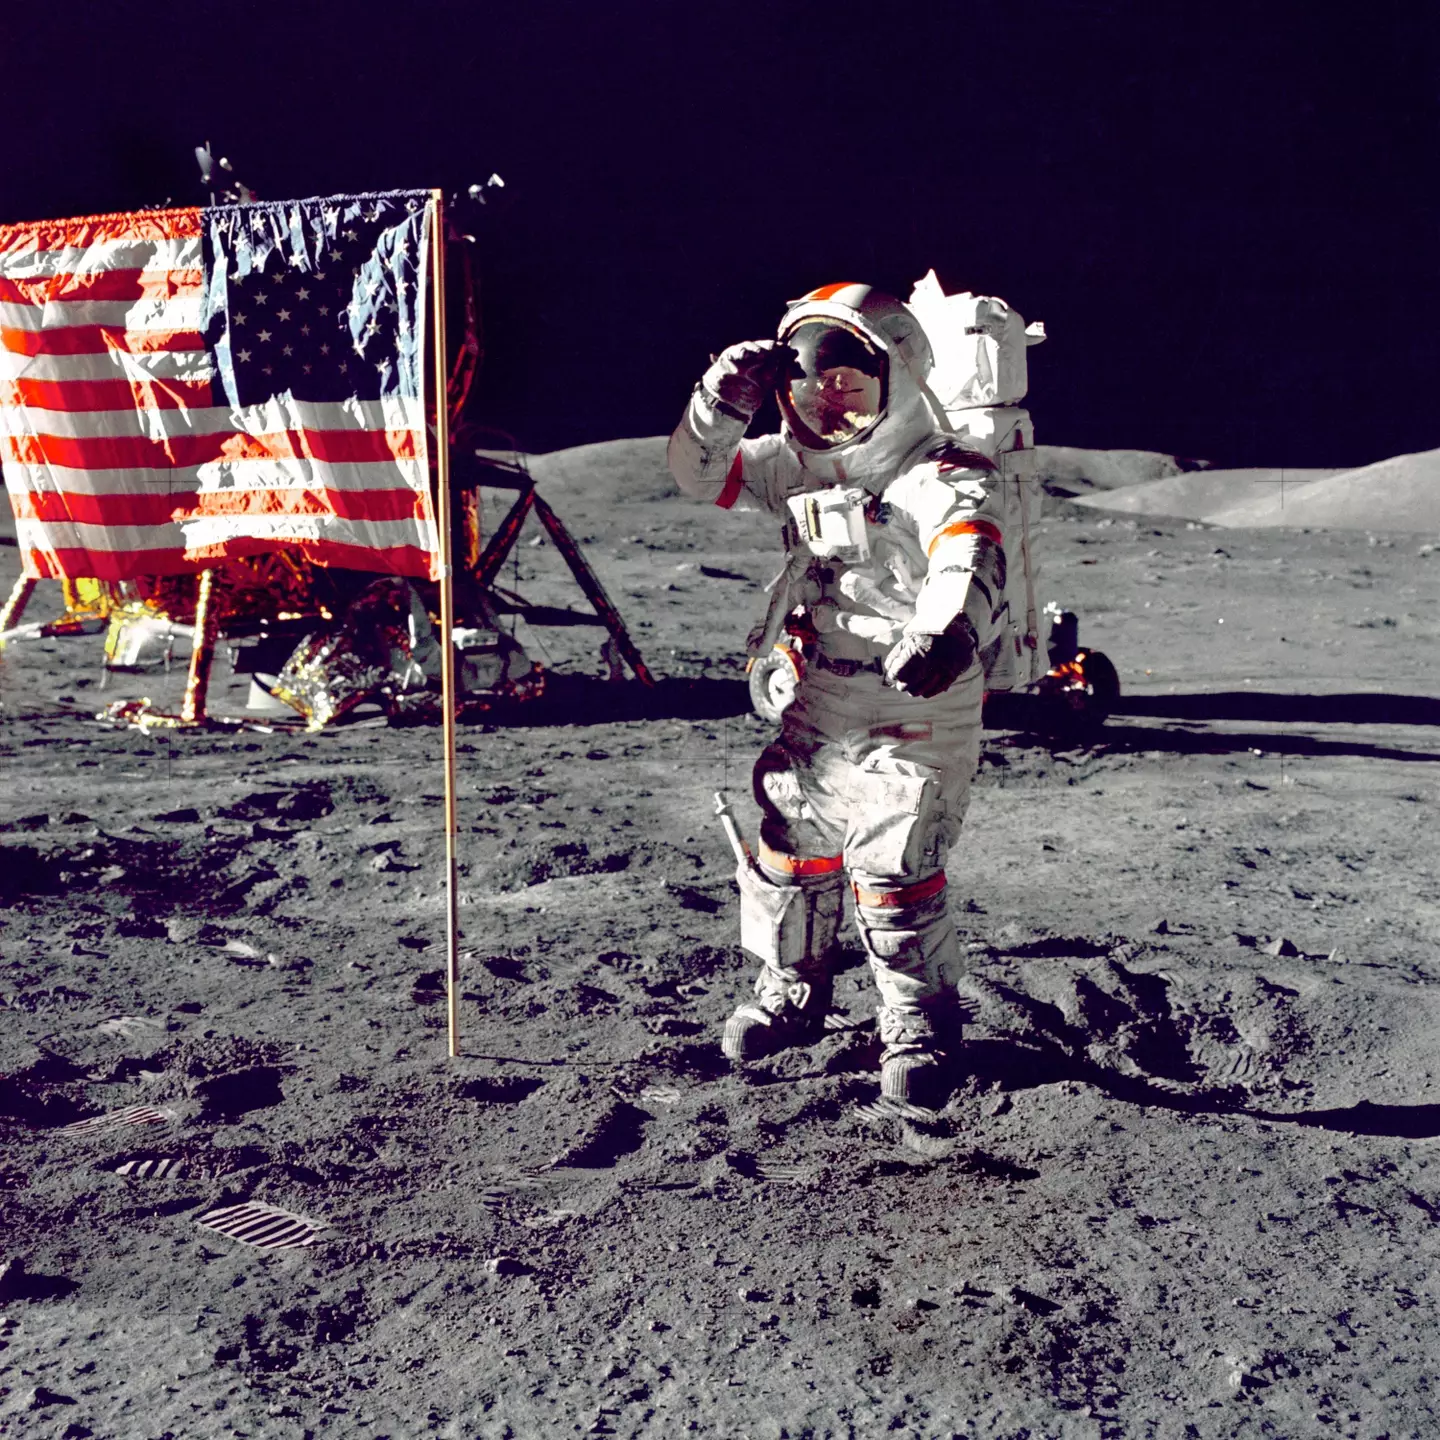 The discovery could help humans live on the moon.